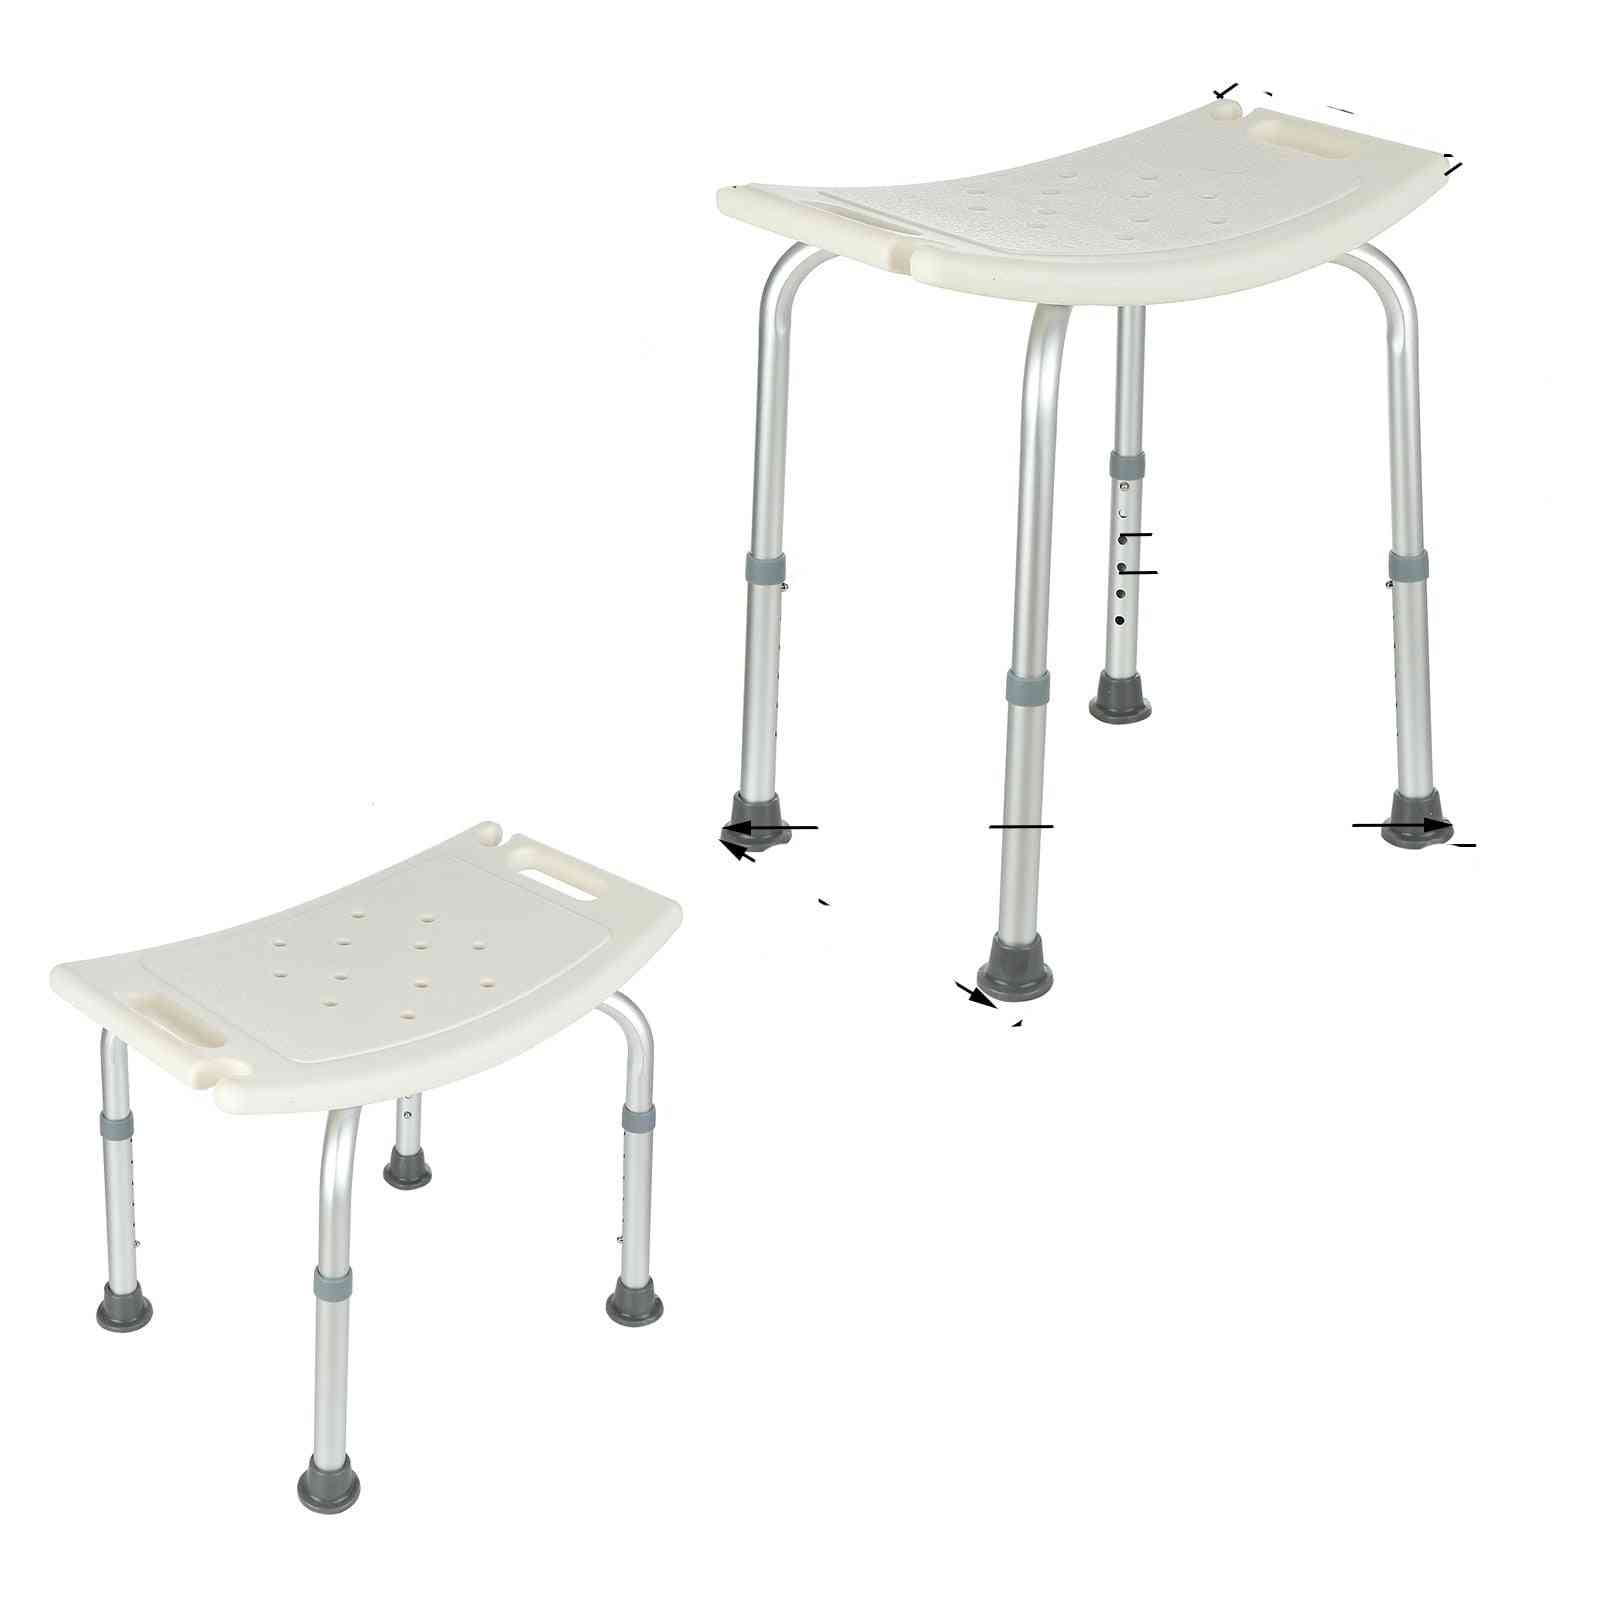 7-gears Height, Bathroom And Shower Chair, Adjustable Bench, Stool Seat